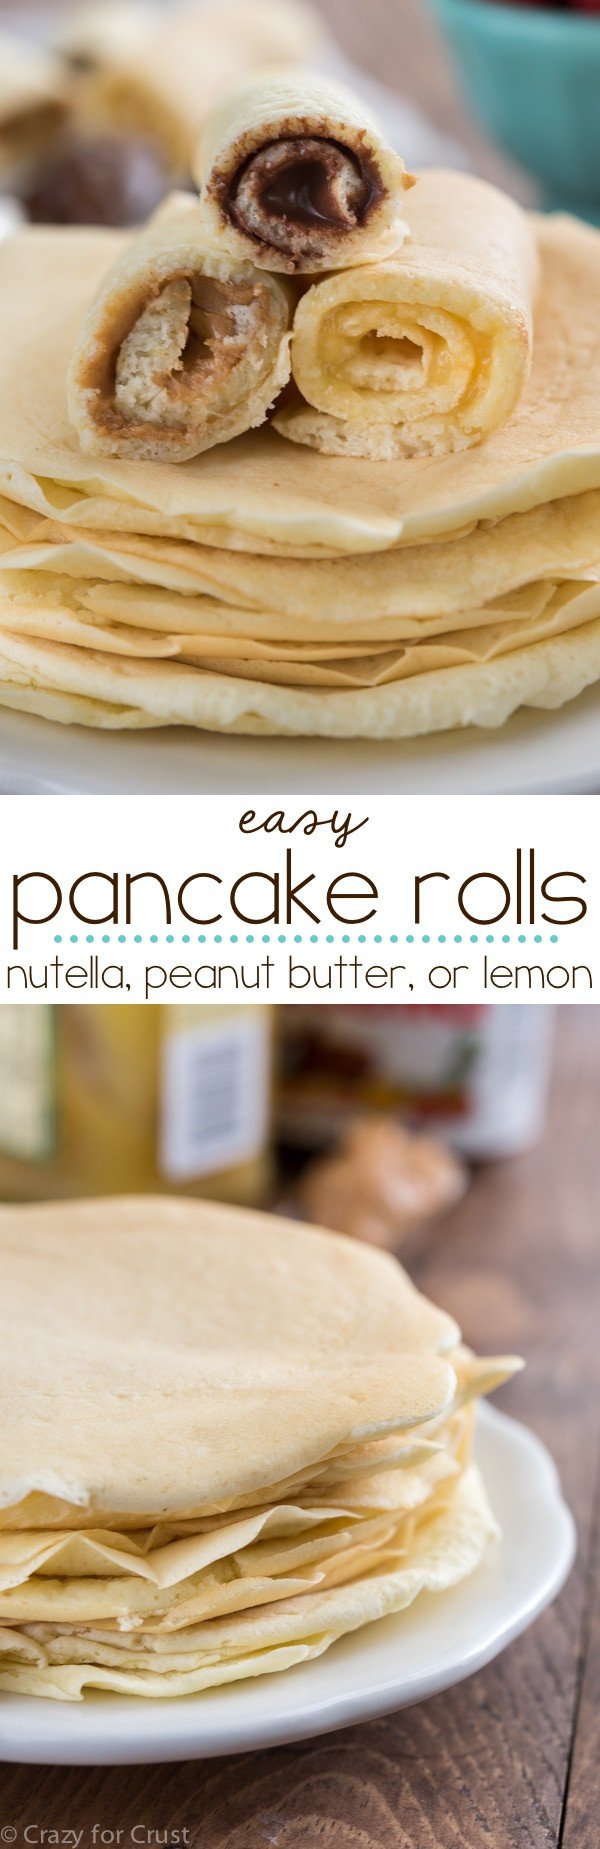 EASY Pancake Rolls with three fillings: Nutella, Peanut Butter, or Lemon Curd! These pancakes are a family favorite recipe and are a foolproof fast breakfast!